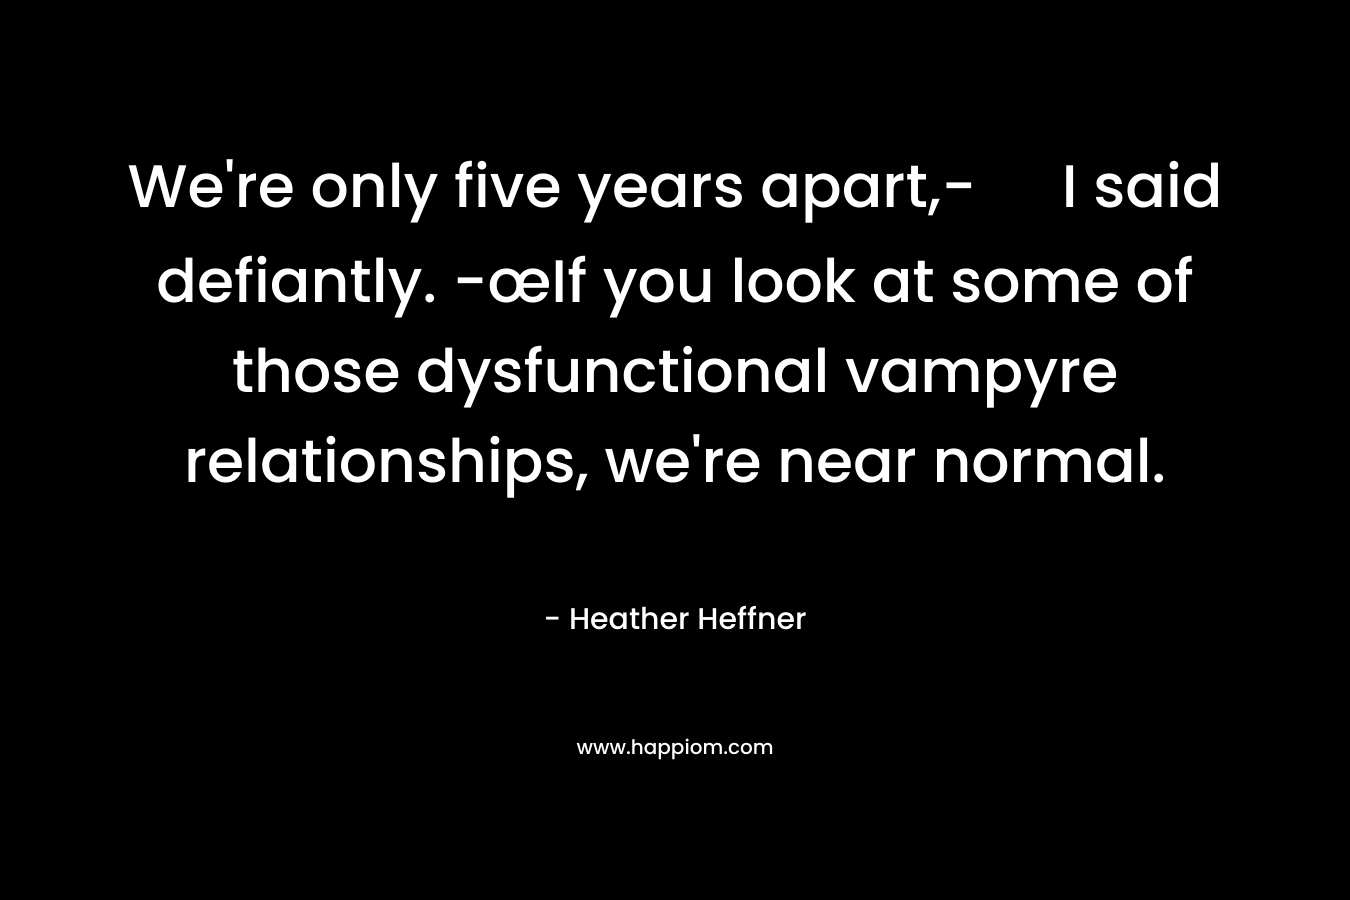 We’re only five years apart,- I said defiantly. -œIf you look at some of those dysfunctional vampyre relationships, we’re near normal. – Heather Heffner